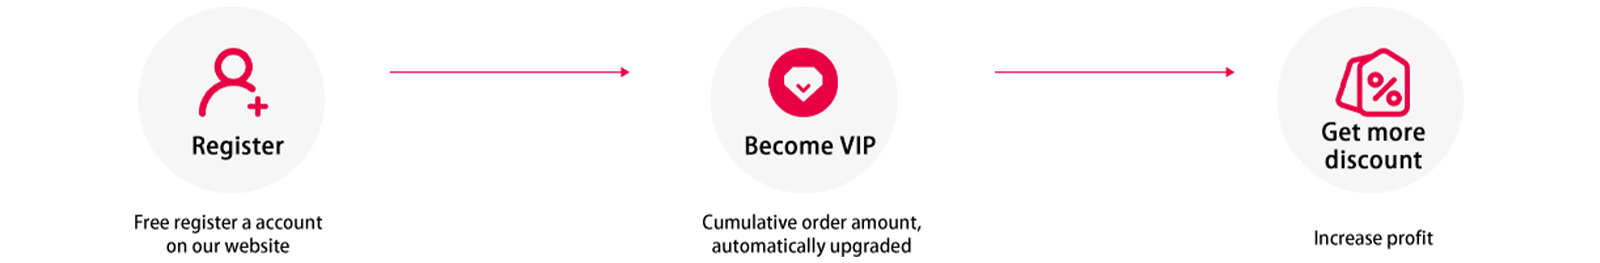 How to become VIP